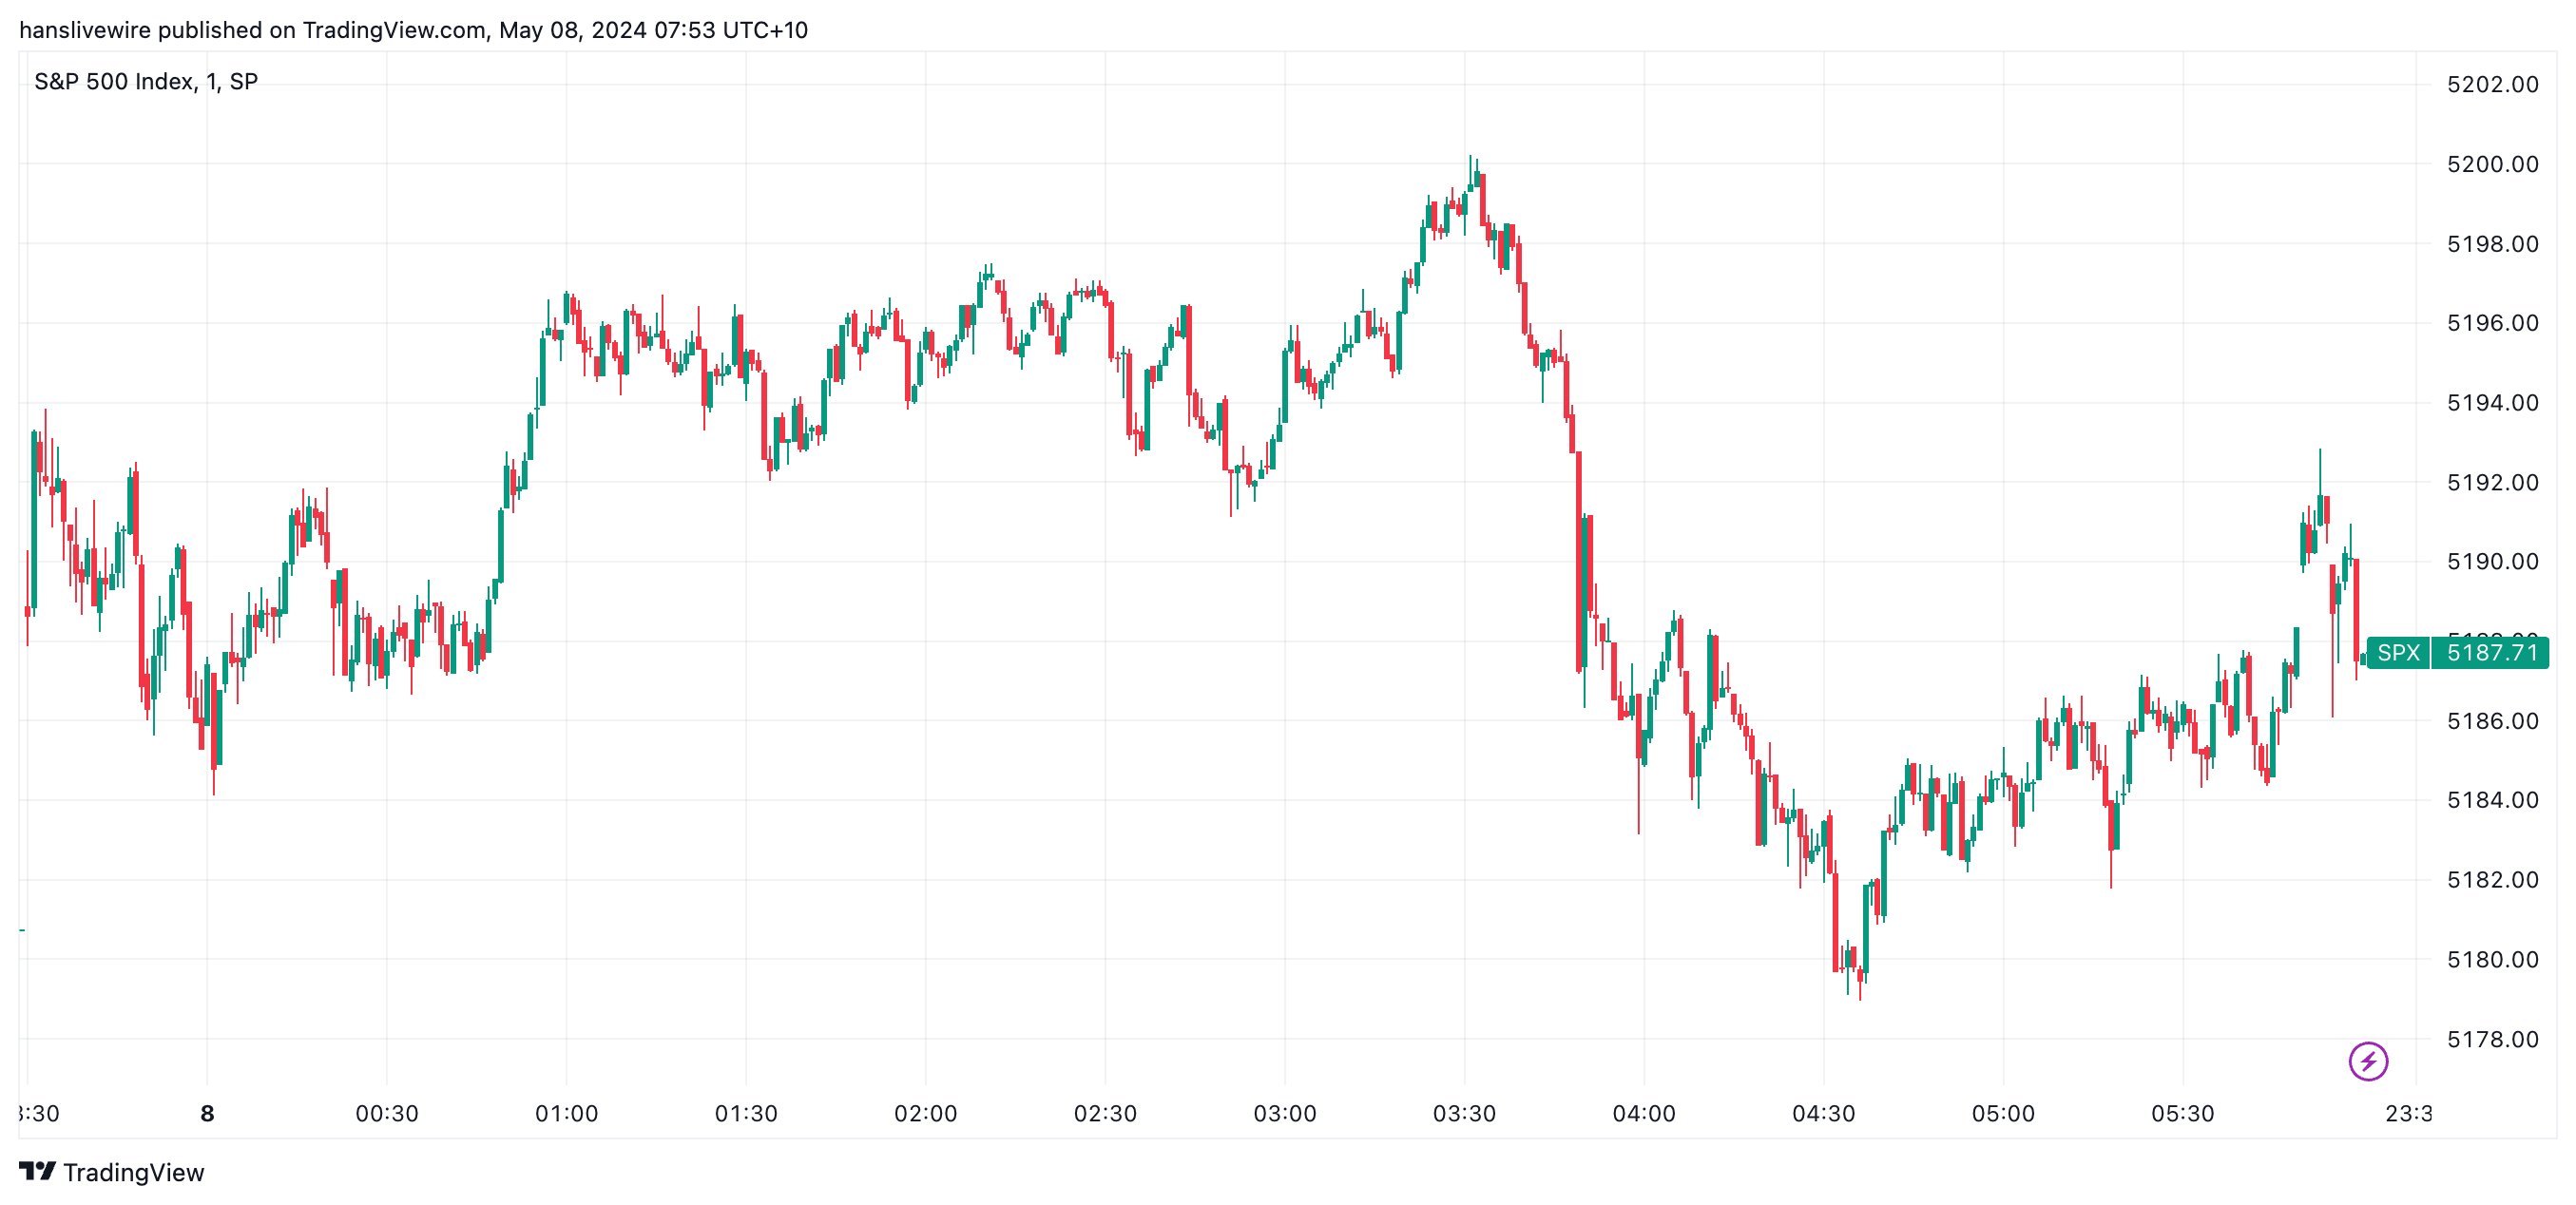 A wild ride finishes with the S&P 500 barely higher. (Source: TradingView)